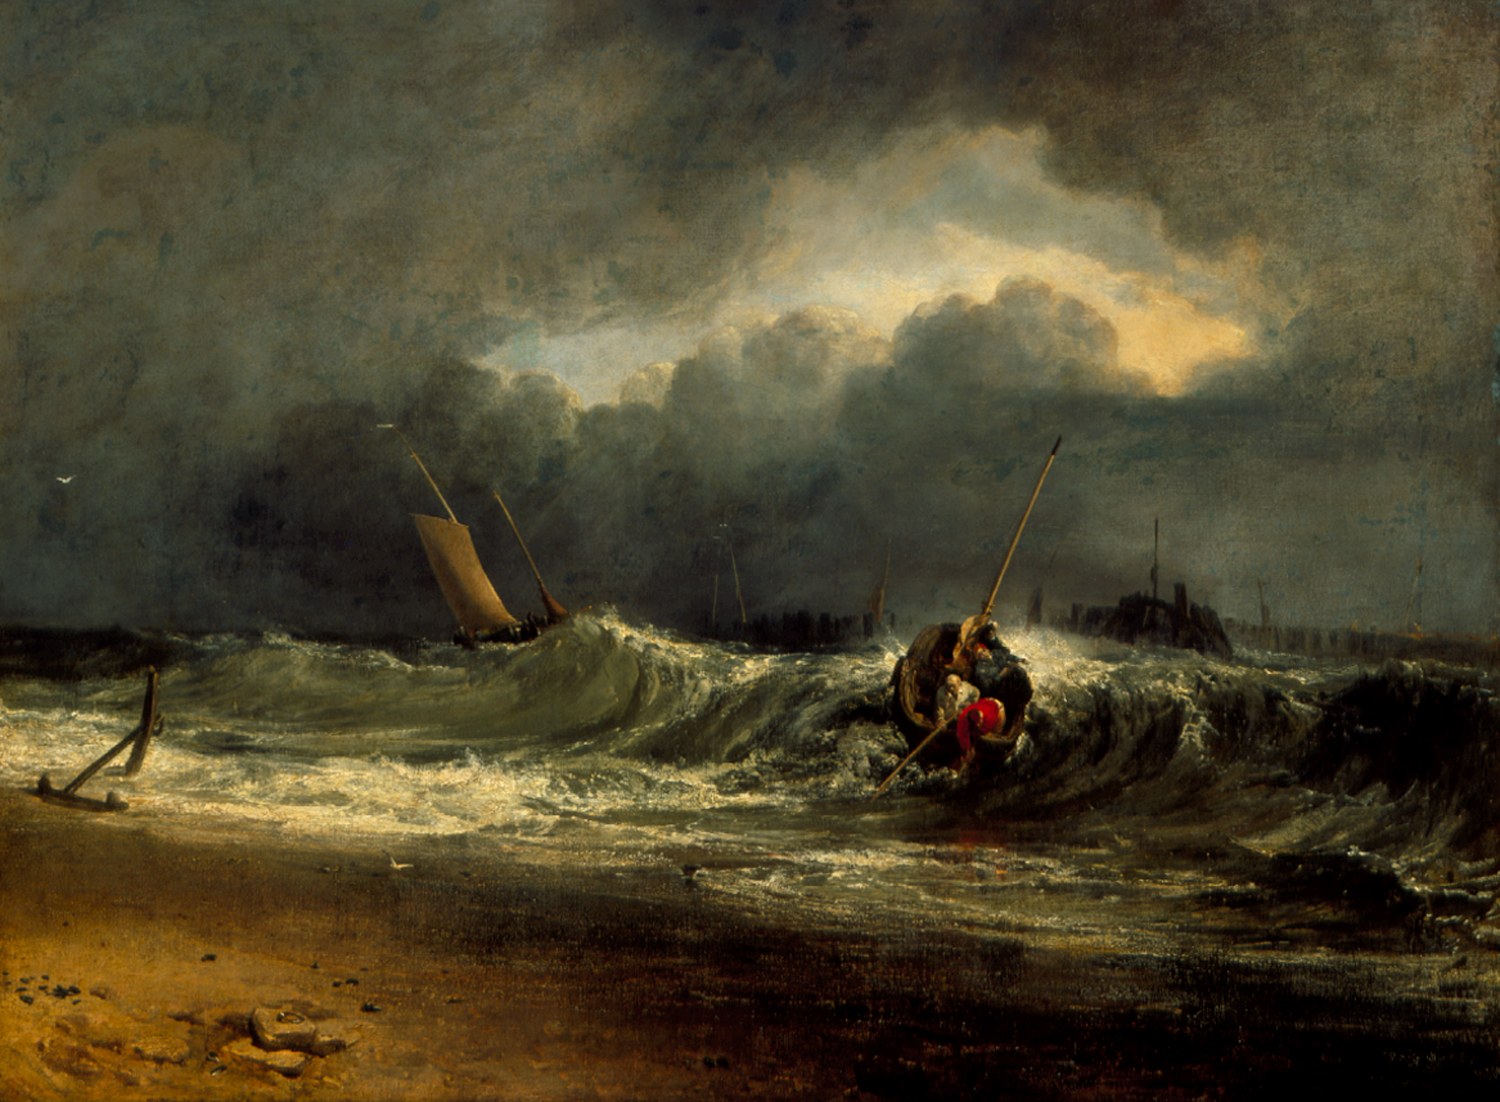 Fishermen Upon a Lee Shore in Squally Weather (1802).